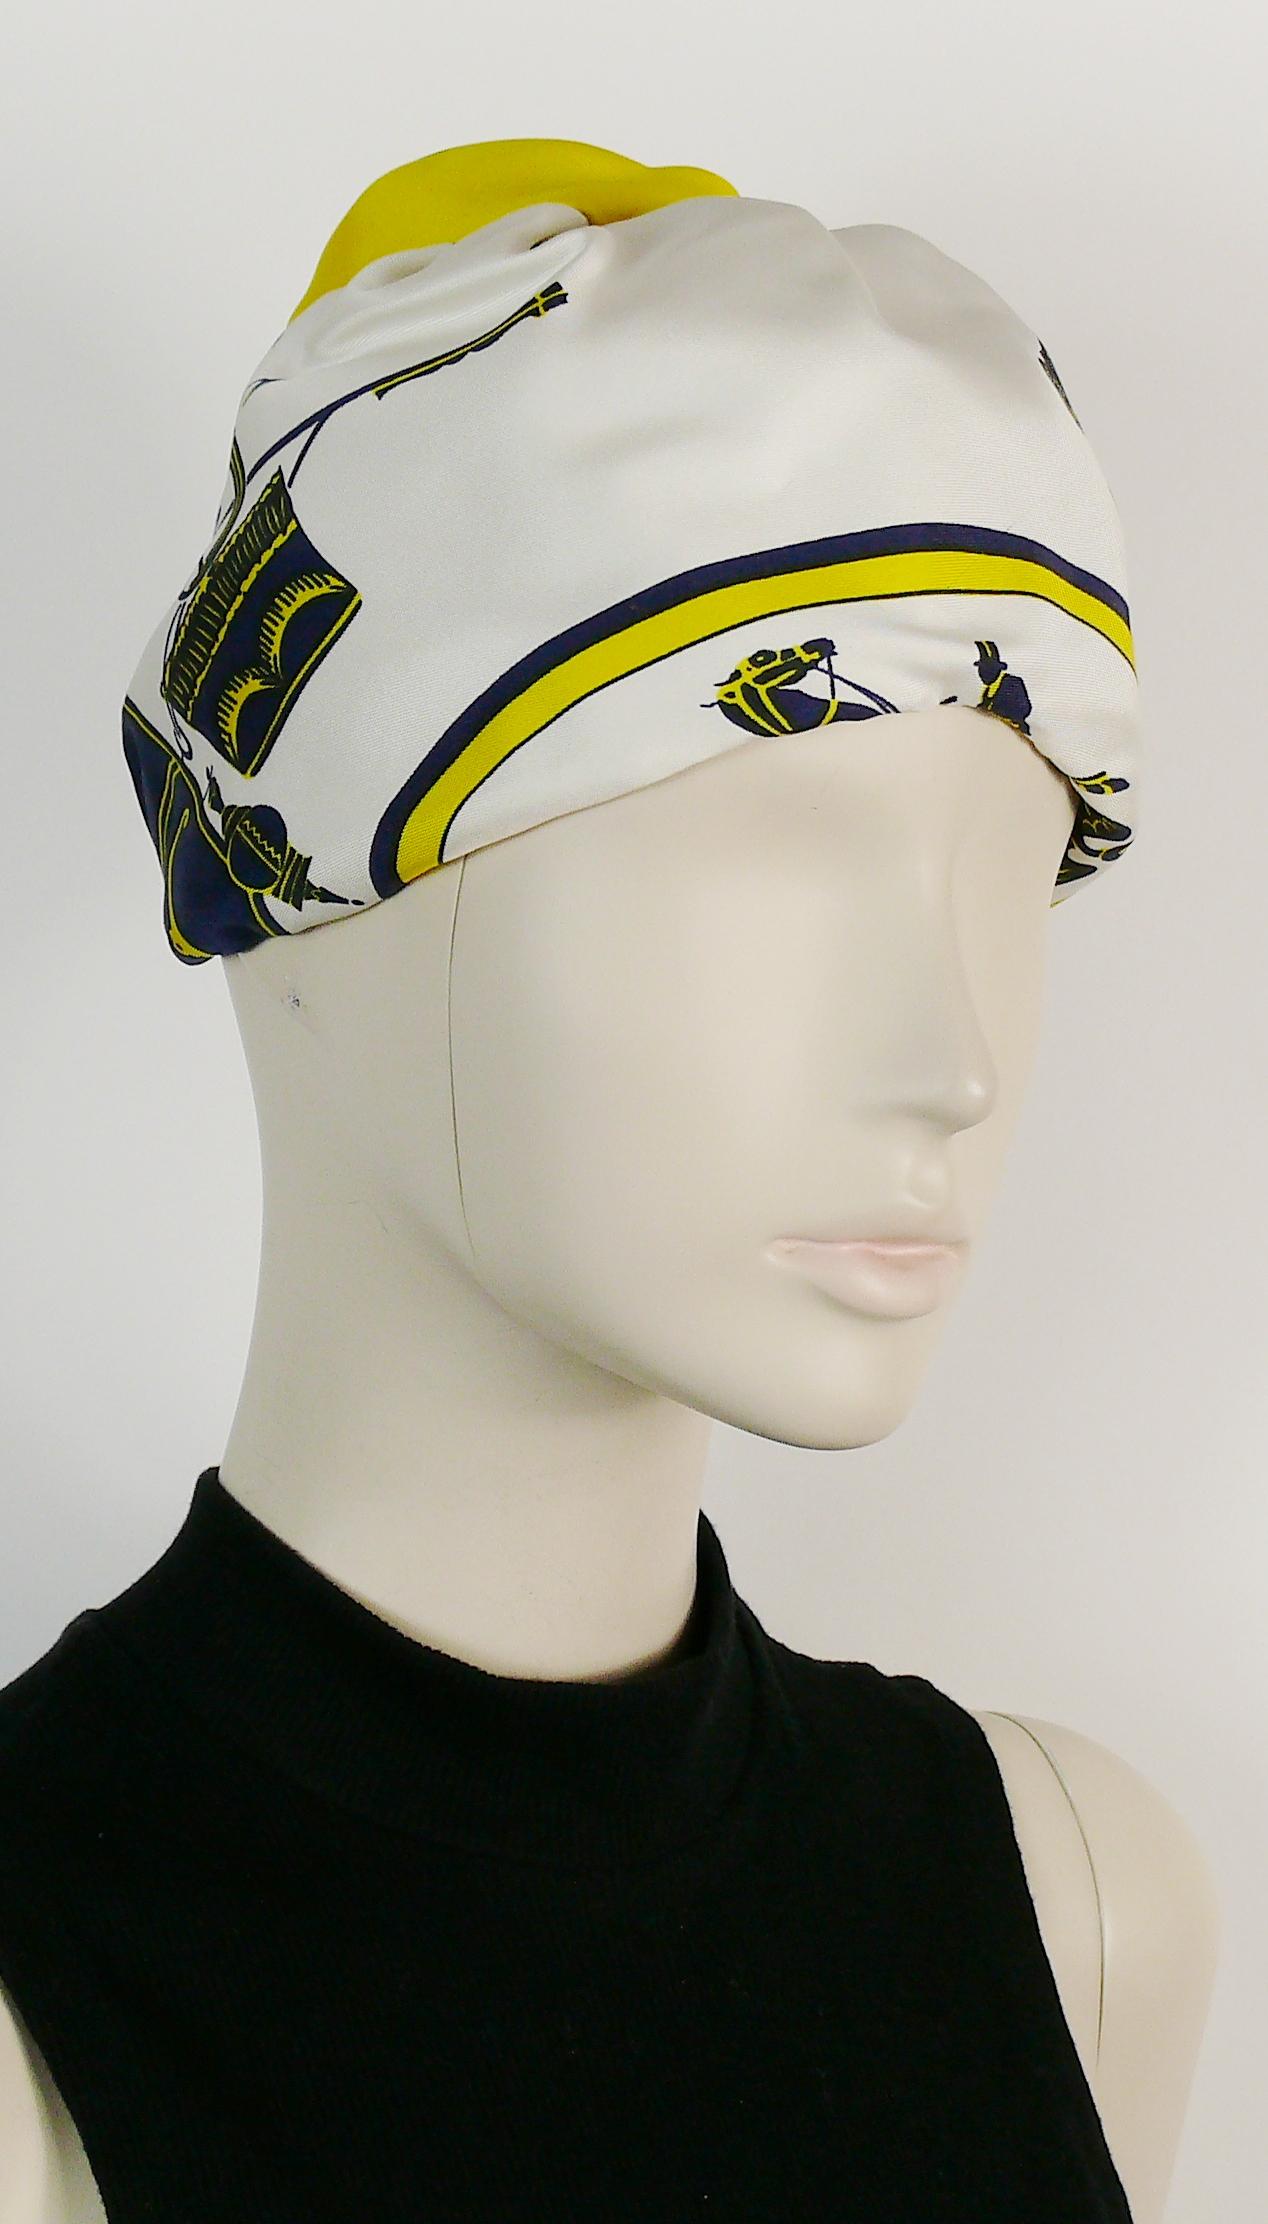 HERMES vintage silk turban hat printed with carriages in shades of blue and yellow on an off-white background.

Netted interior.
Grosgrain headband.
Elasticated neckline.

Label reads HERMES Paris.

Indicative measurements : circumference approx. 52